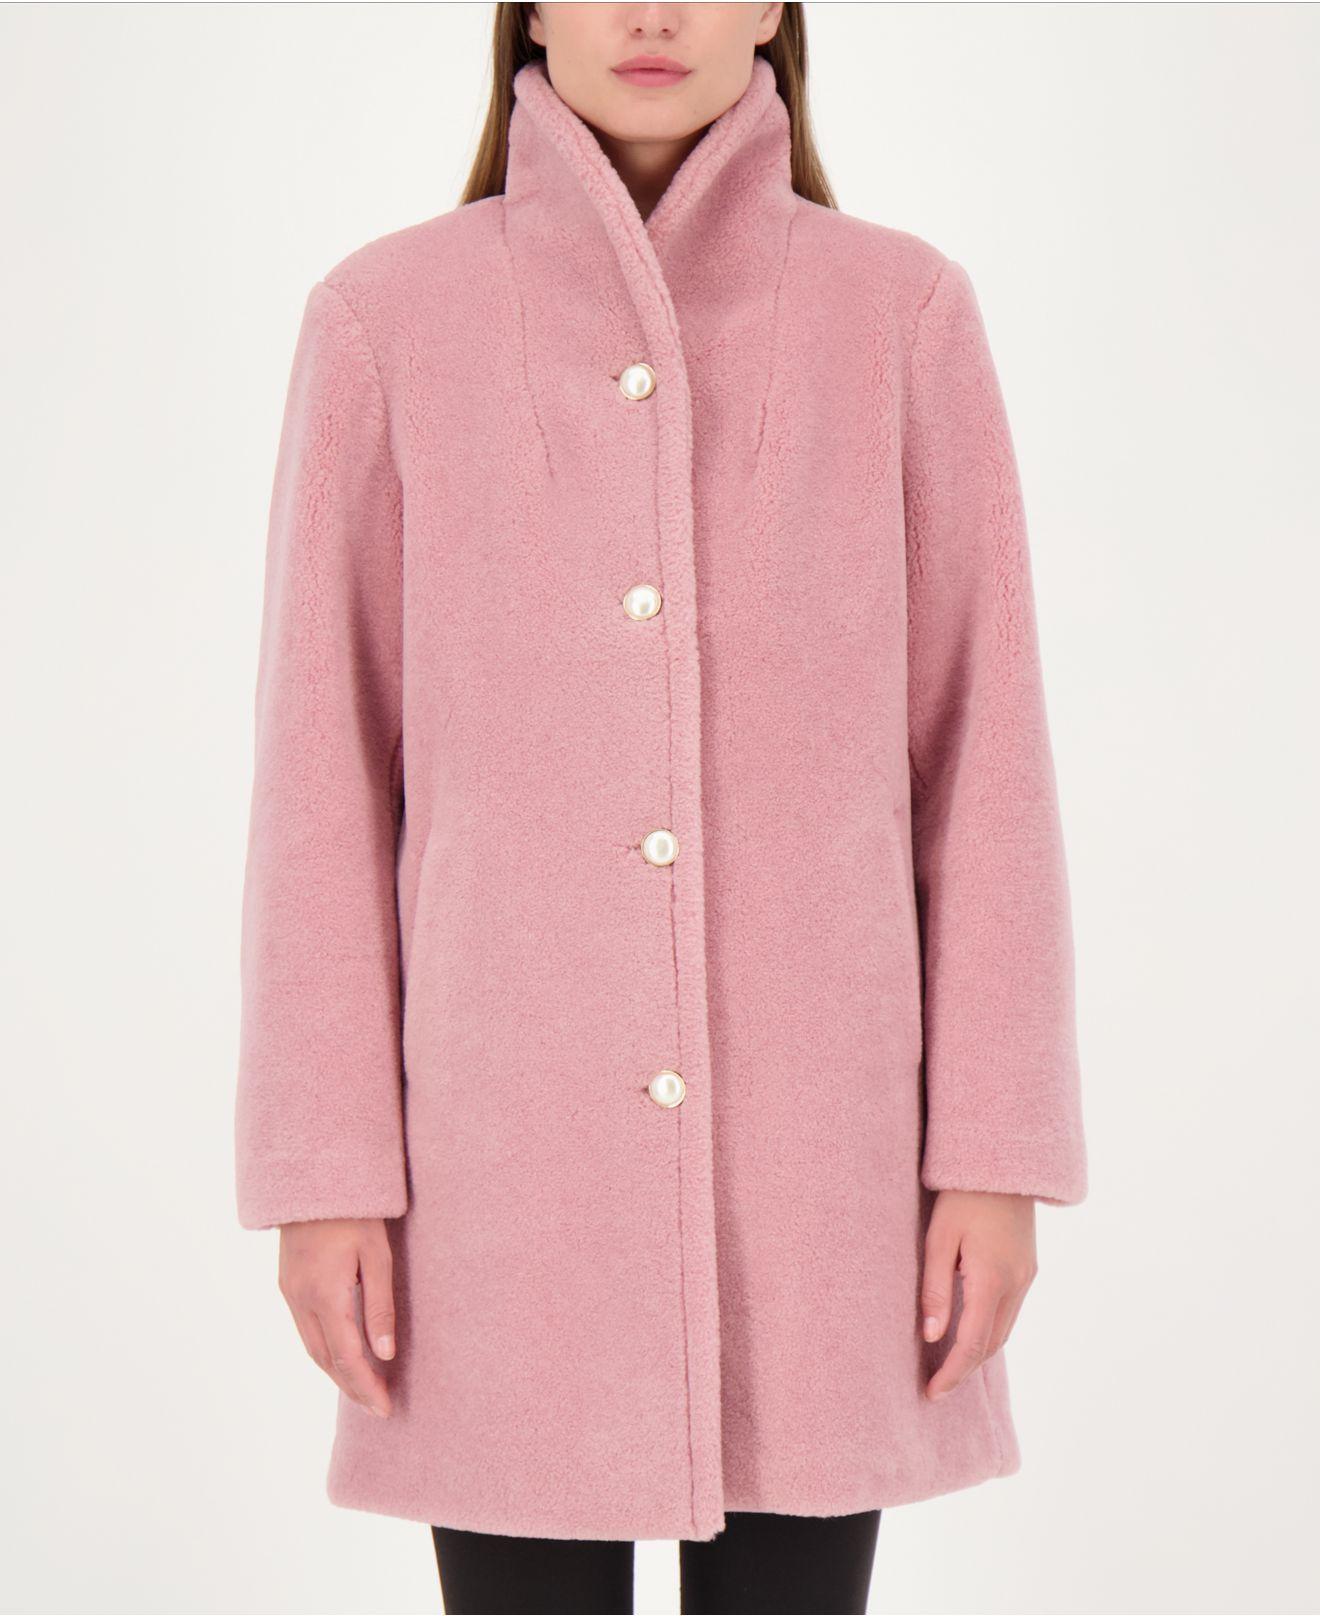 Kate Spade Pearl-button Teddy Faux-fur Coat in Pink - Lyst